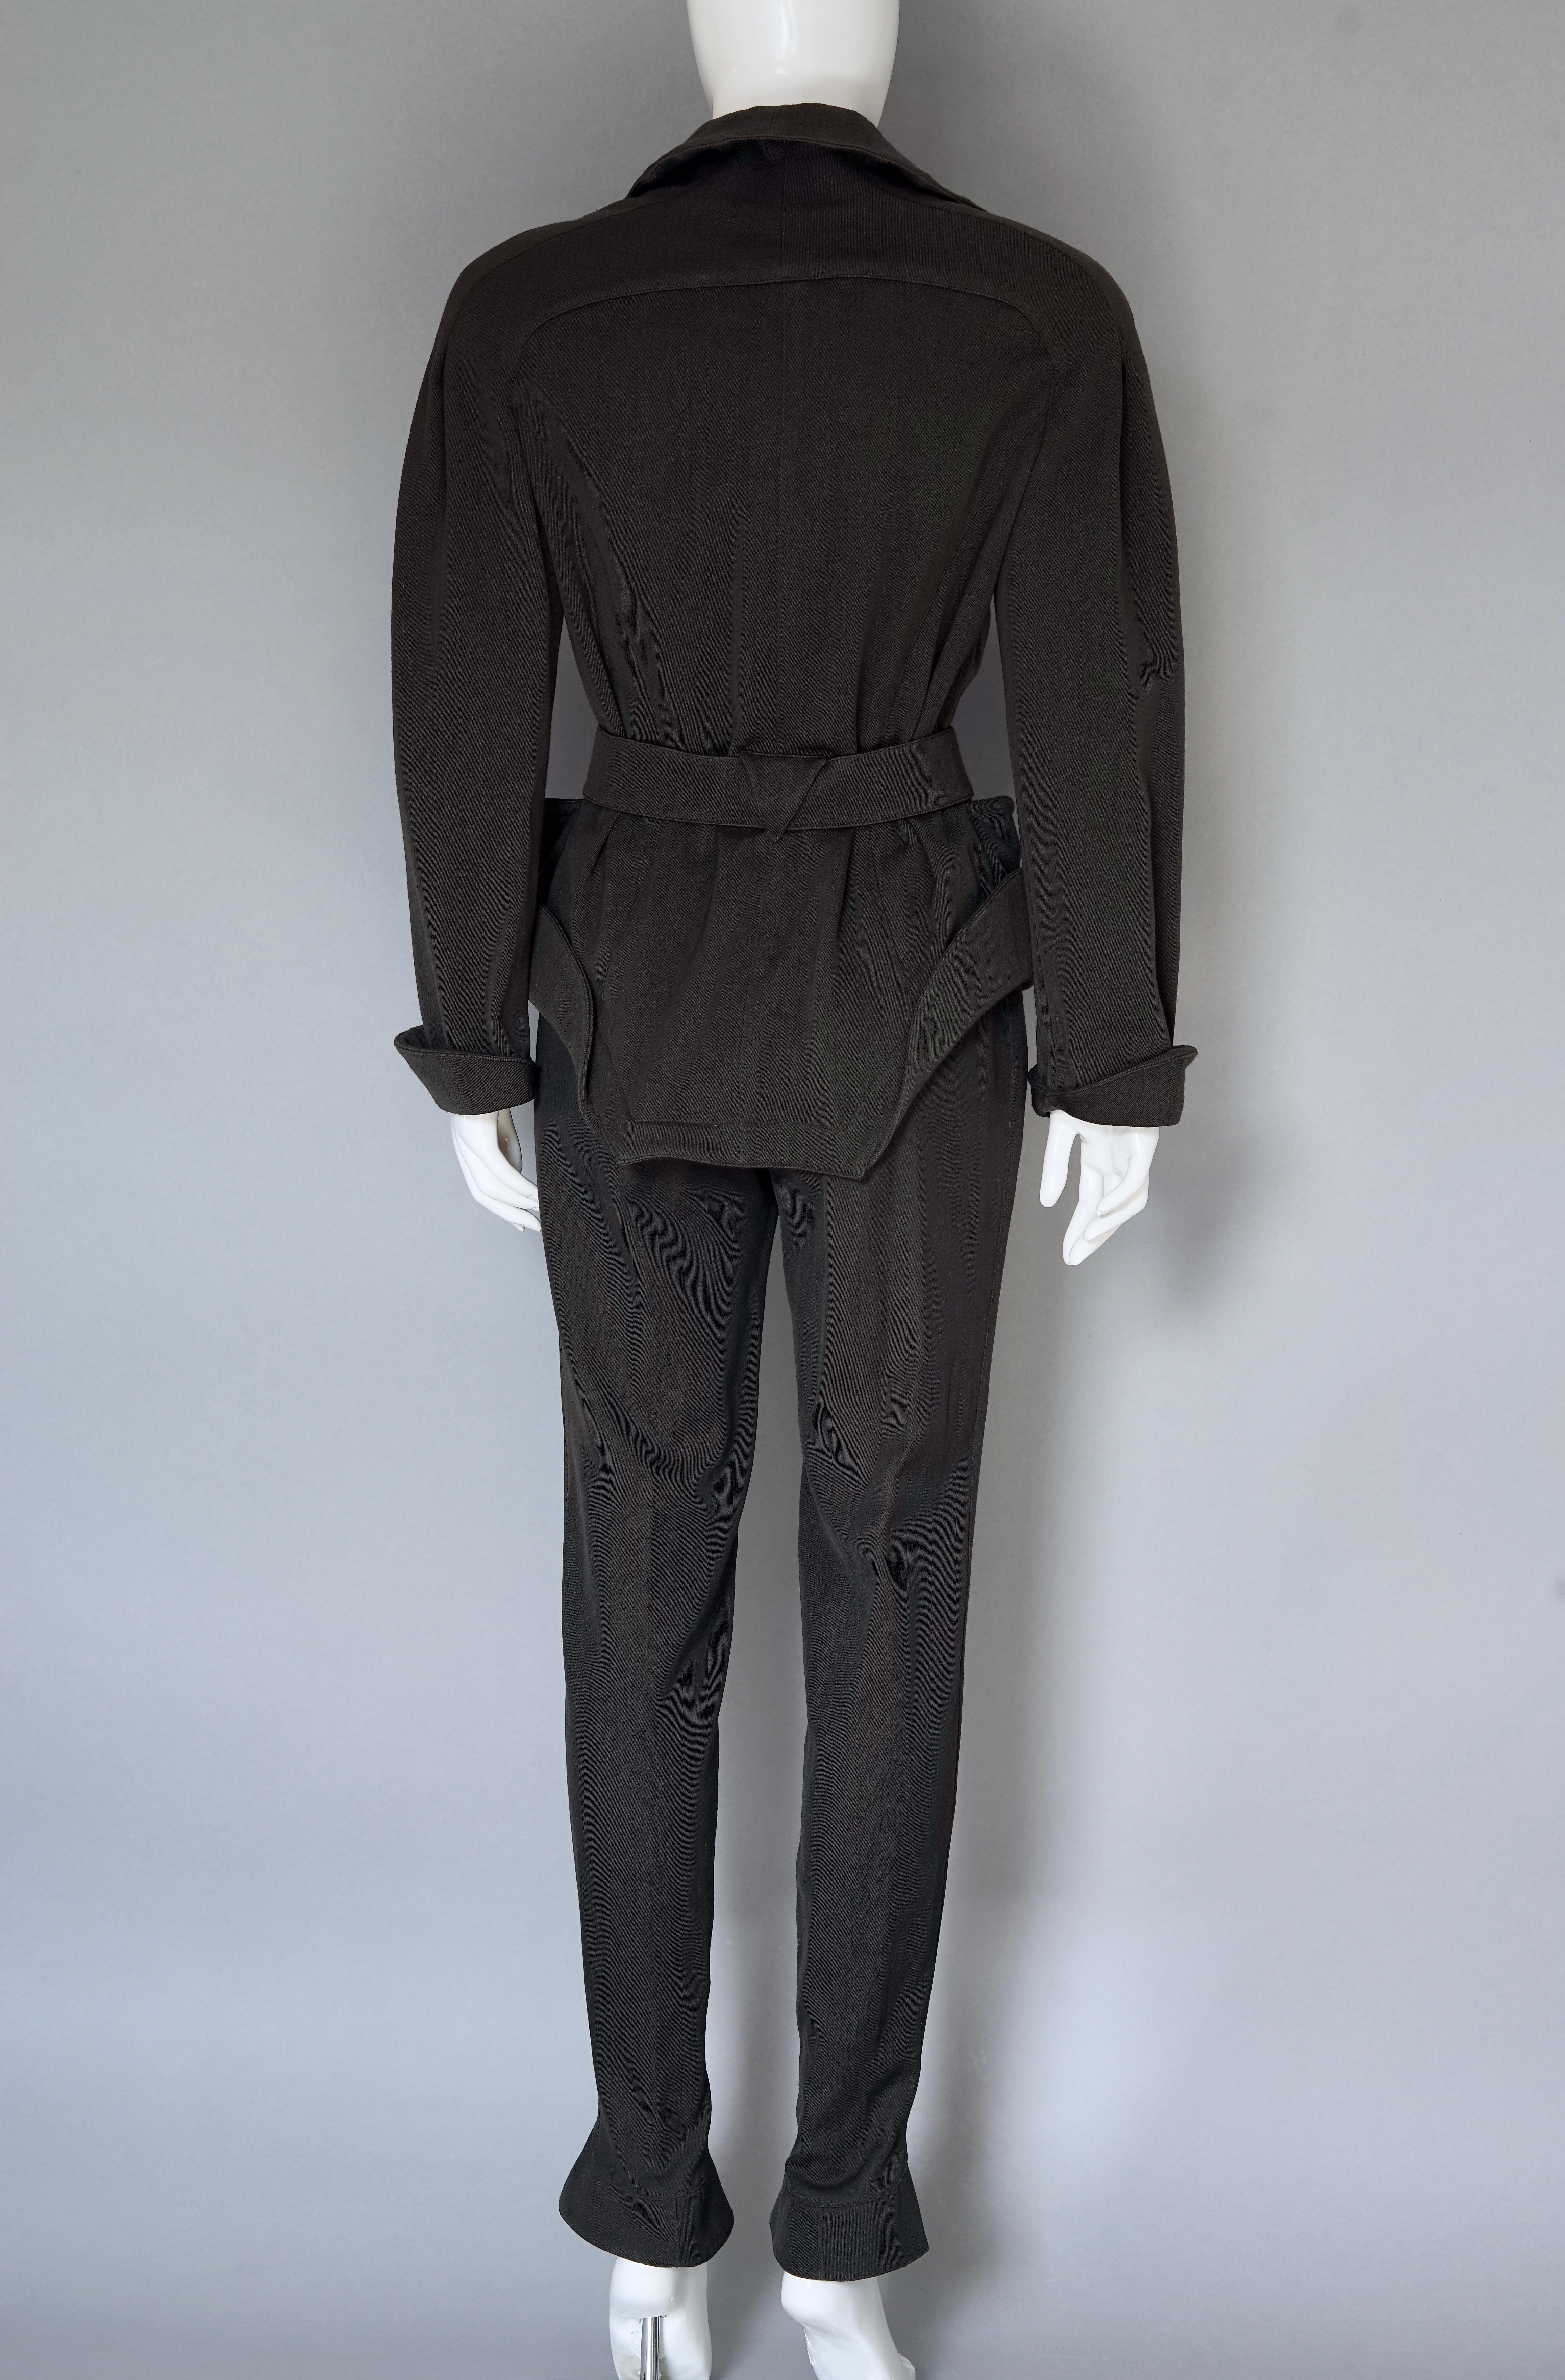 Vintage RARE THIERRY MUGLER Space Age Sculptural Belted Jacket Trouser Suit 1